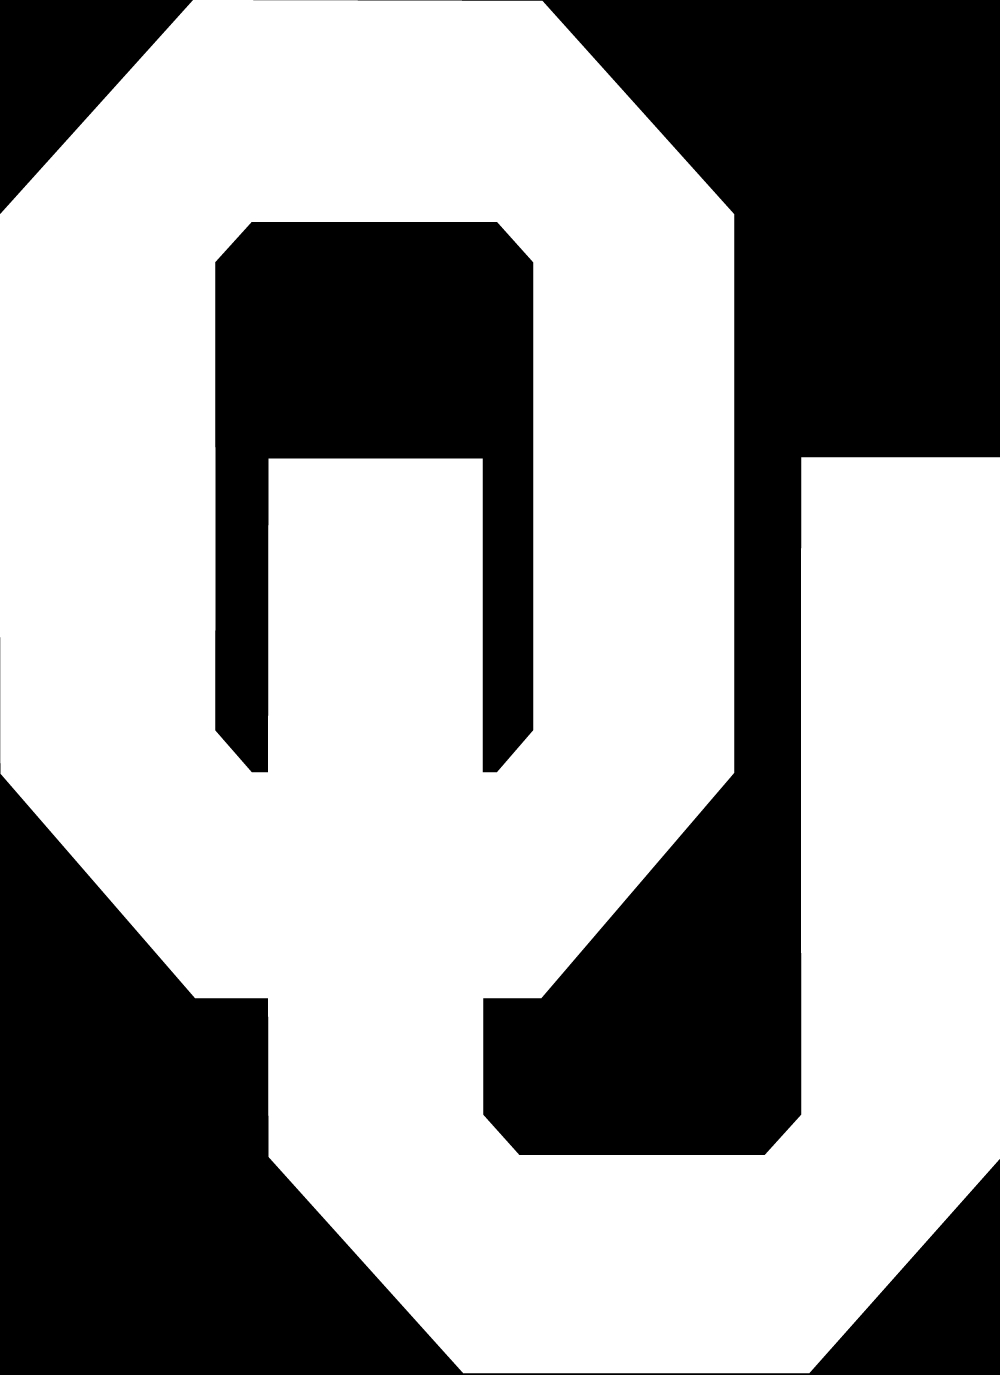 University Of Oklahoma Png - White, Transparent background PNG HD thumbnail